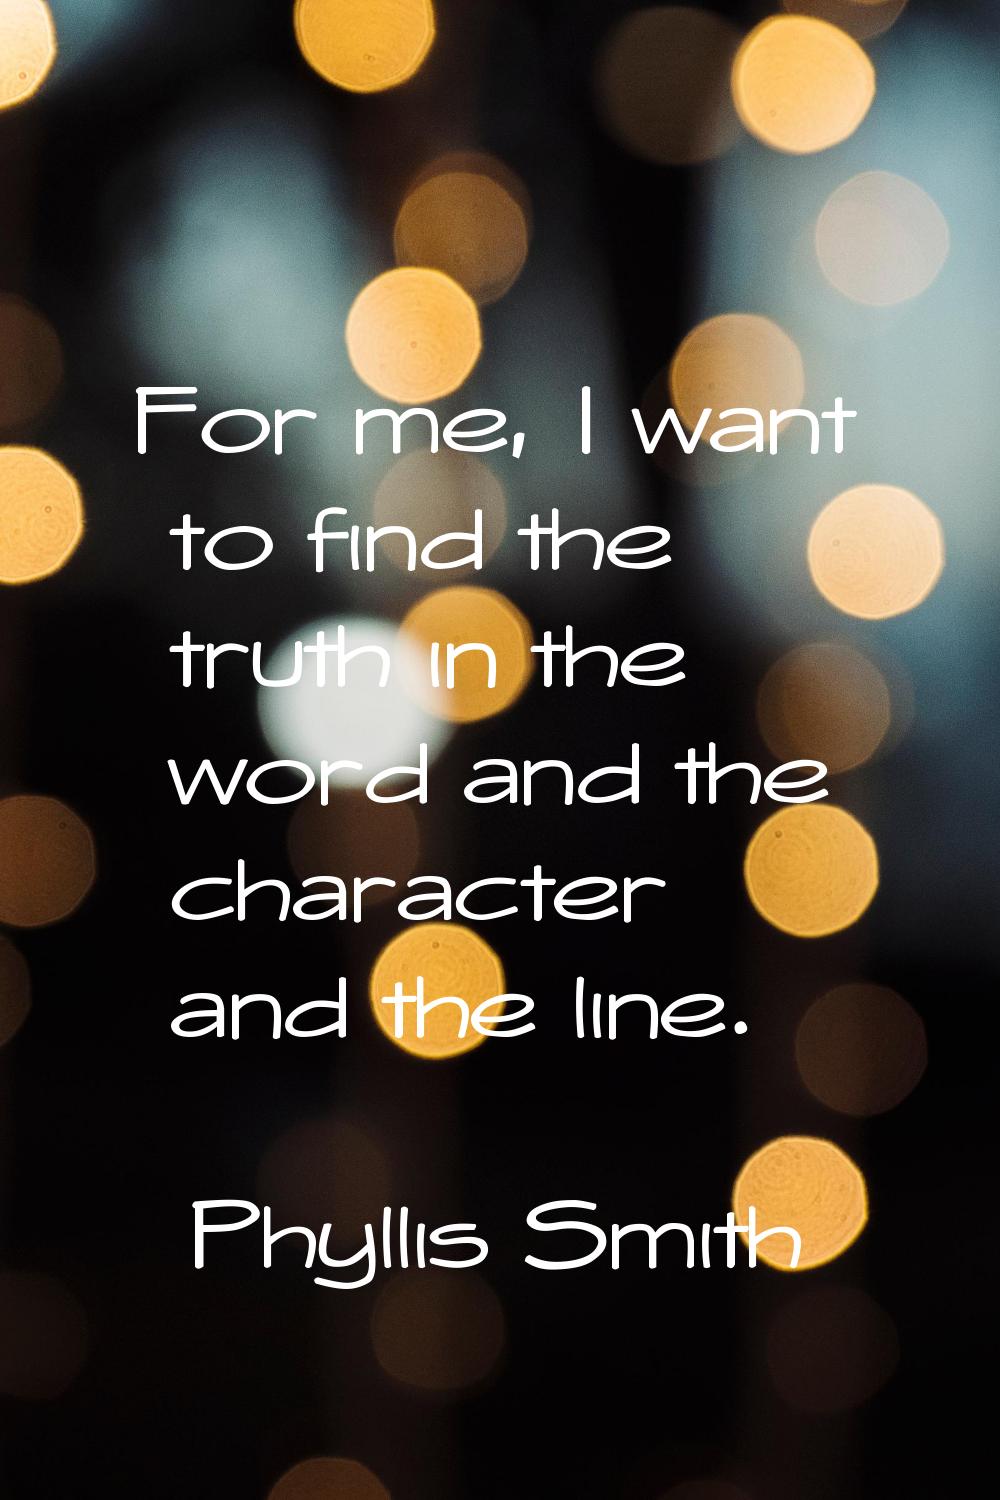 For me, I want to find the truth in the word and the character and the line.